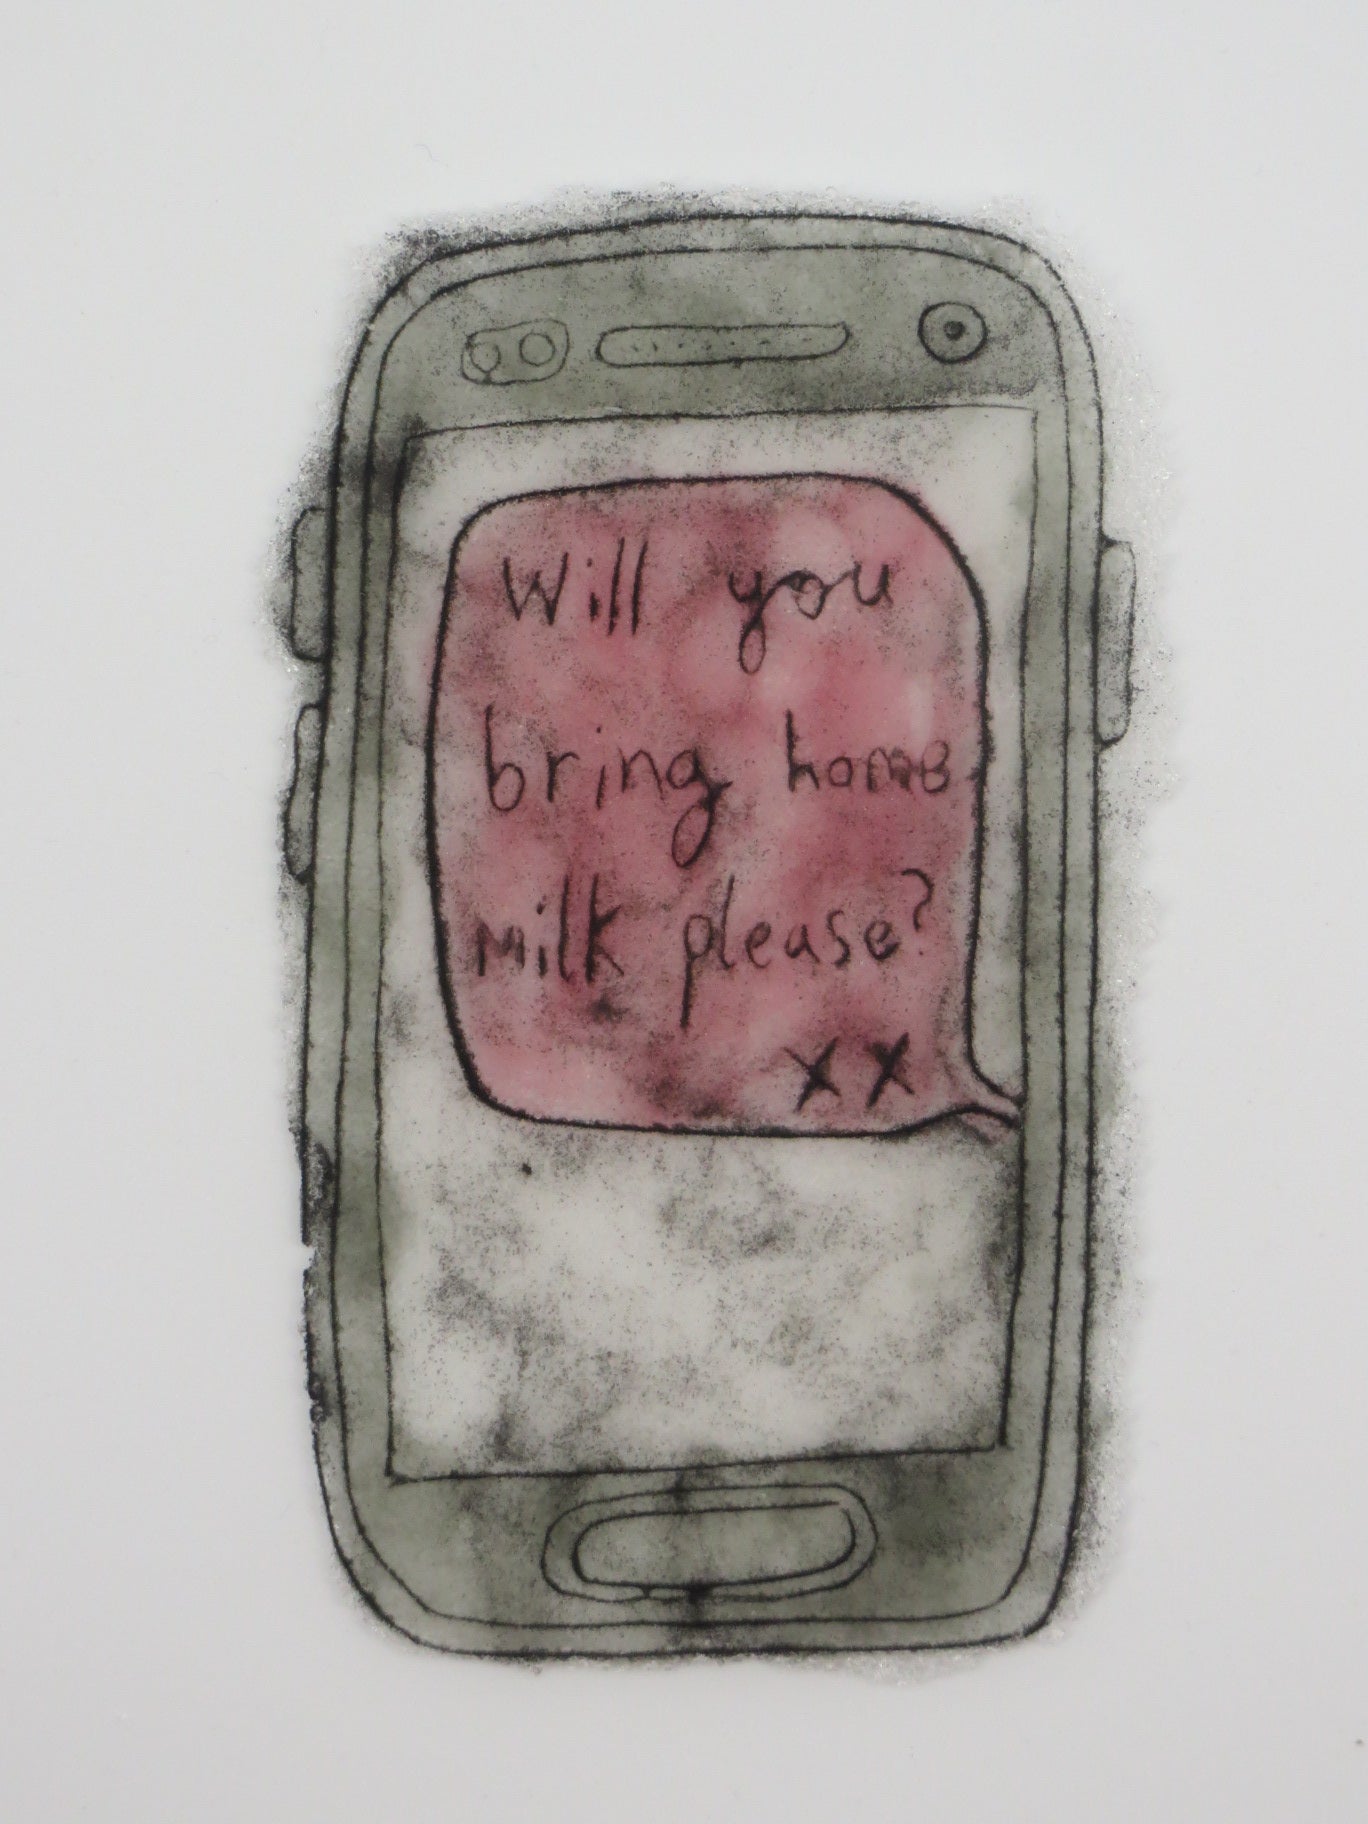 Bring Home Milk Please in Pink - Modern Love Letter in Glass